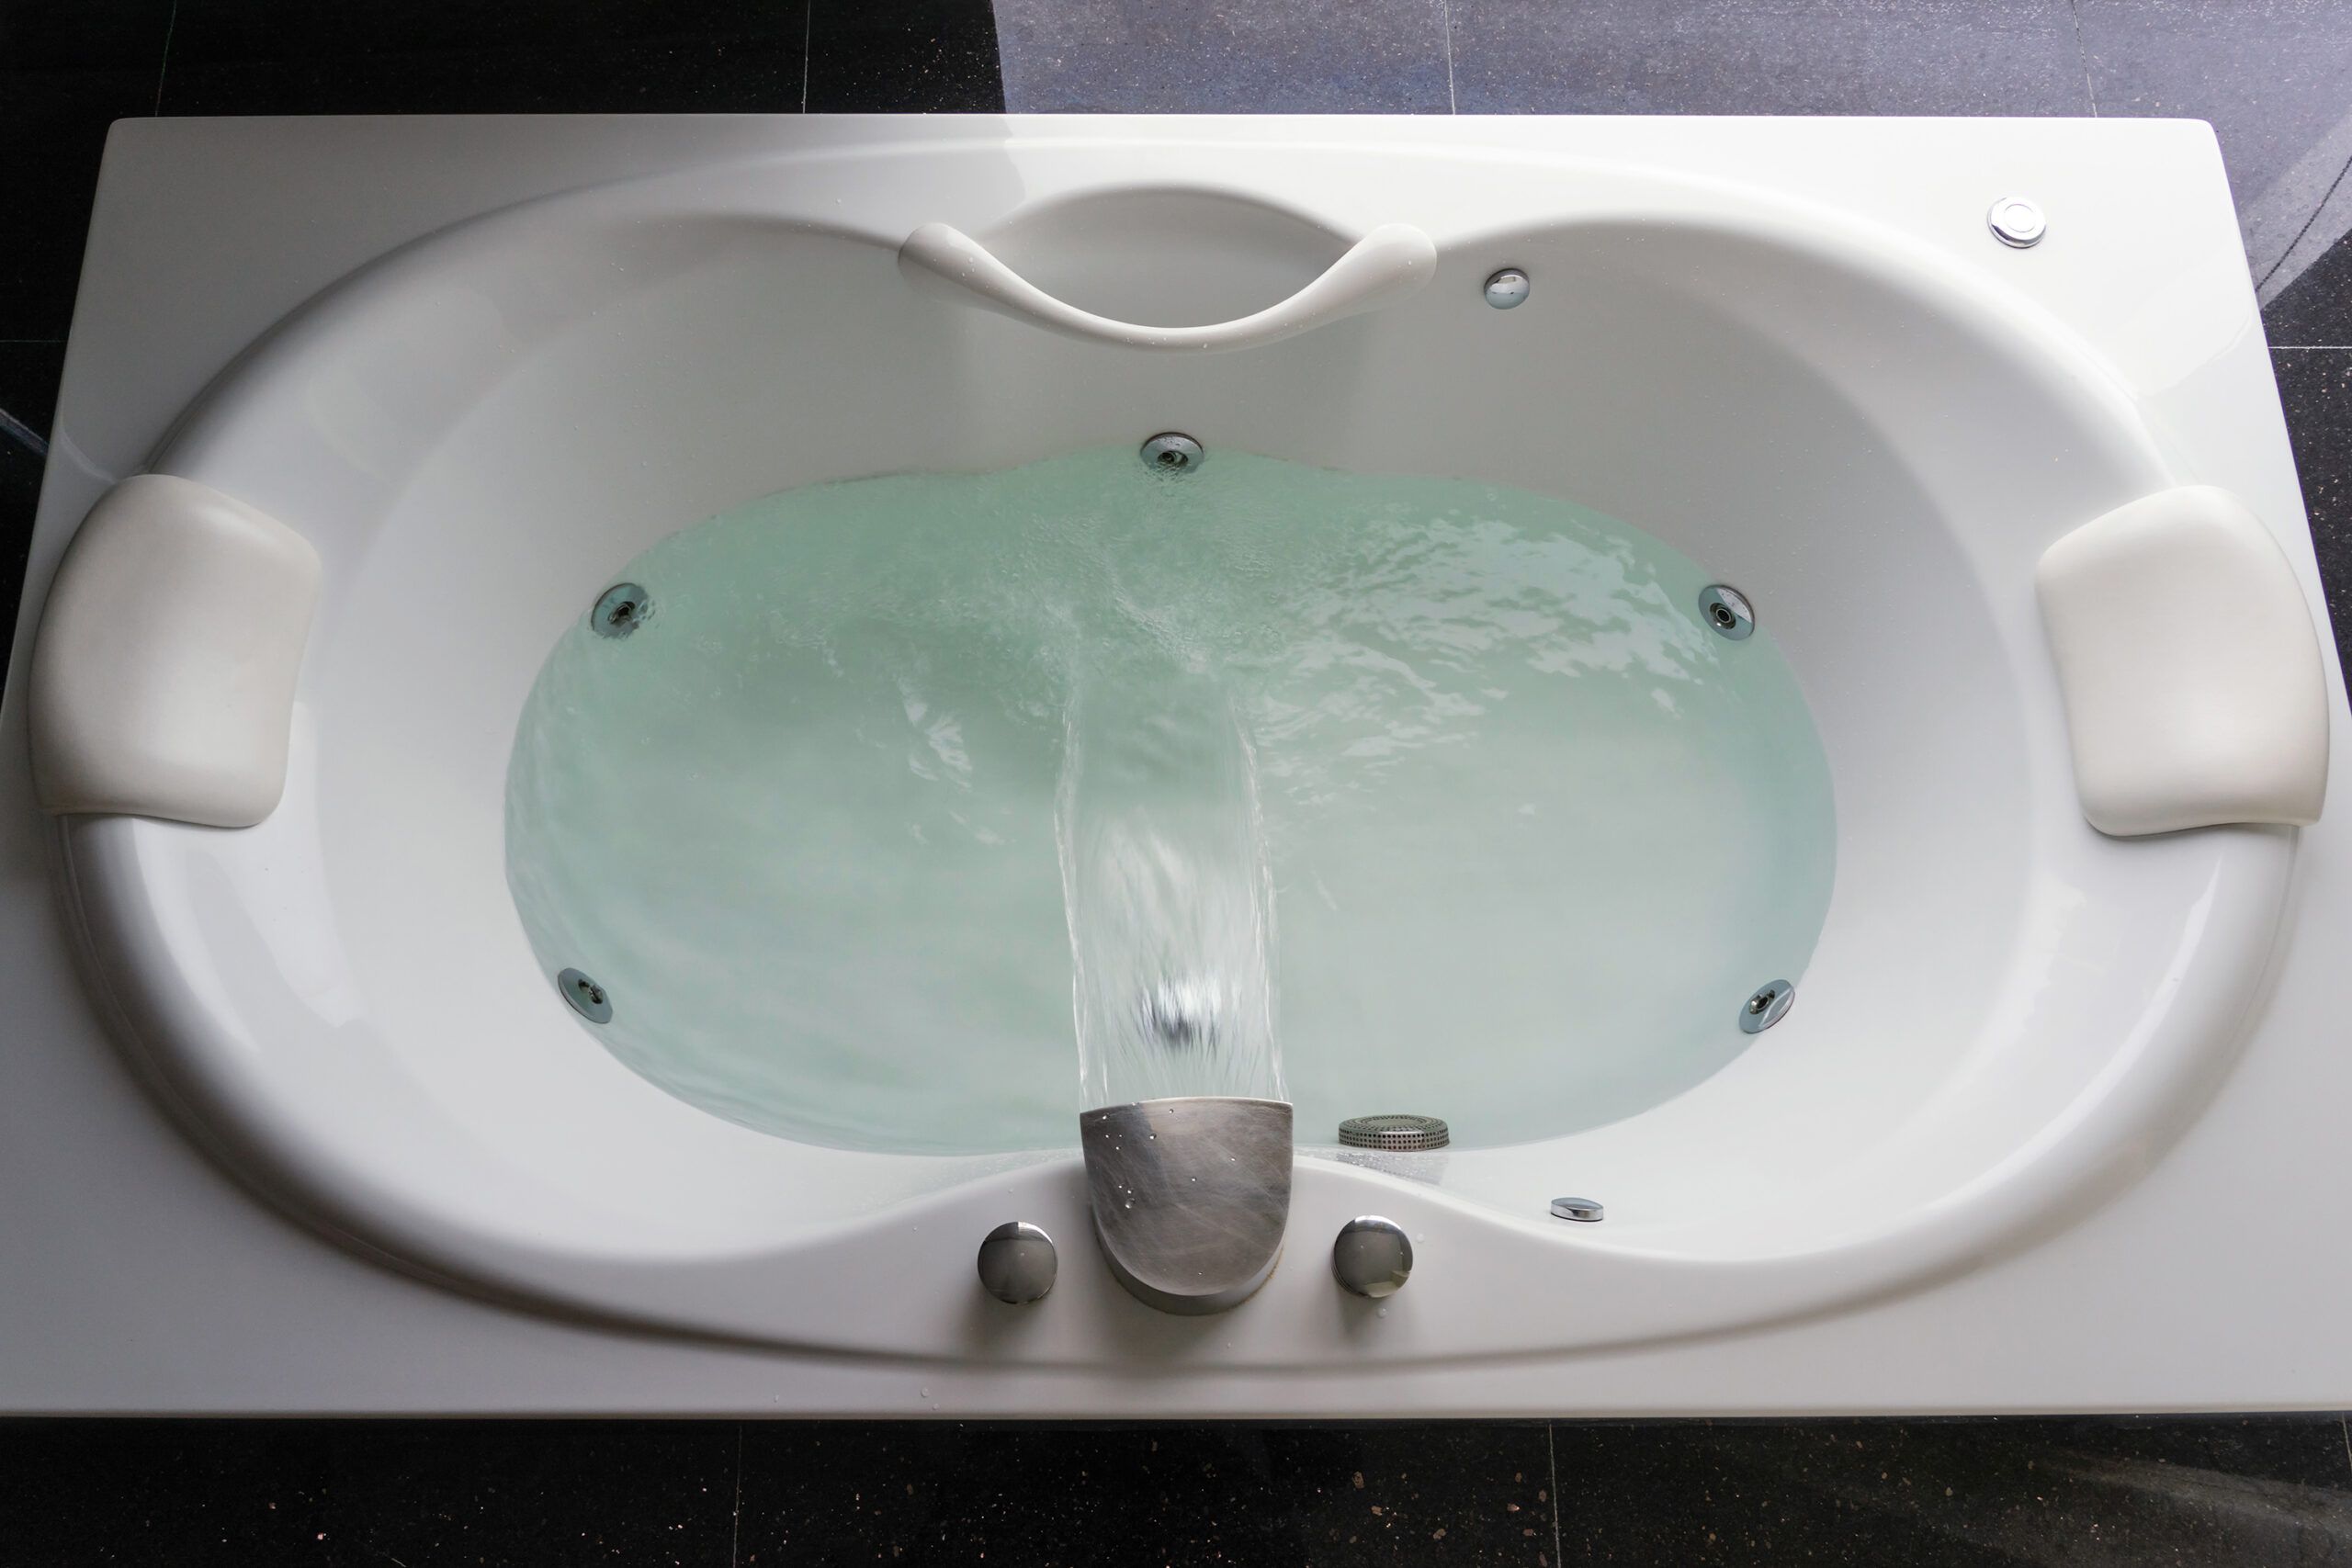 Turn Your Tub Into a Whirlpool, Convert-a-Tub